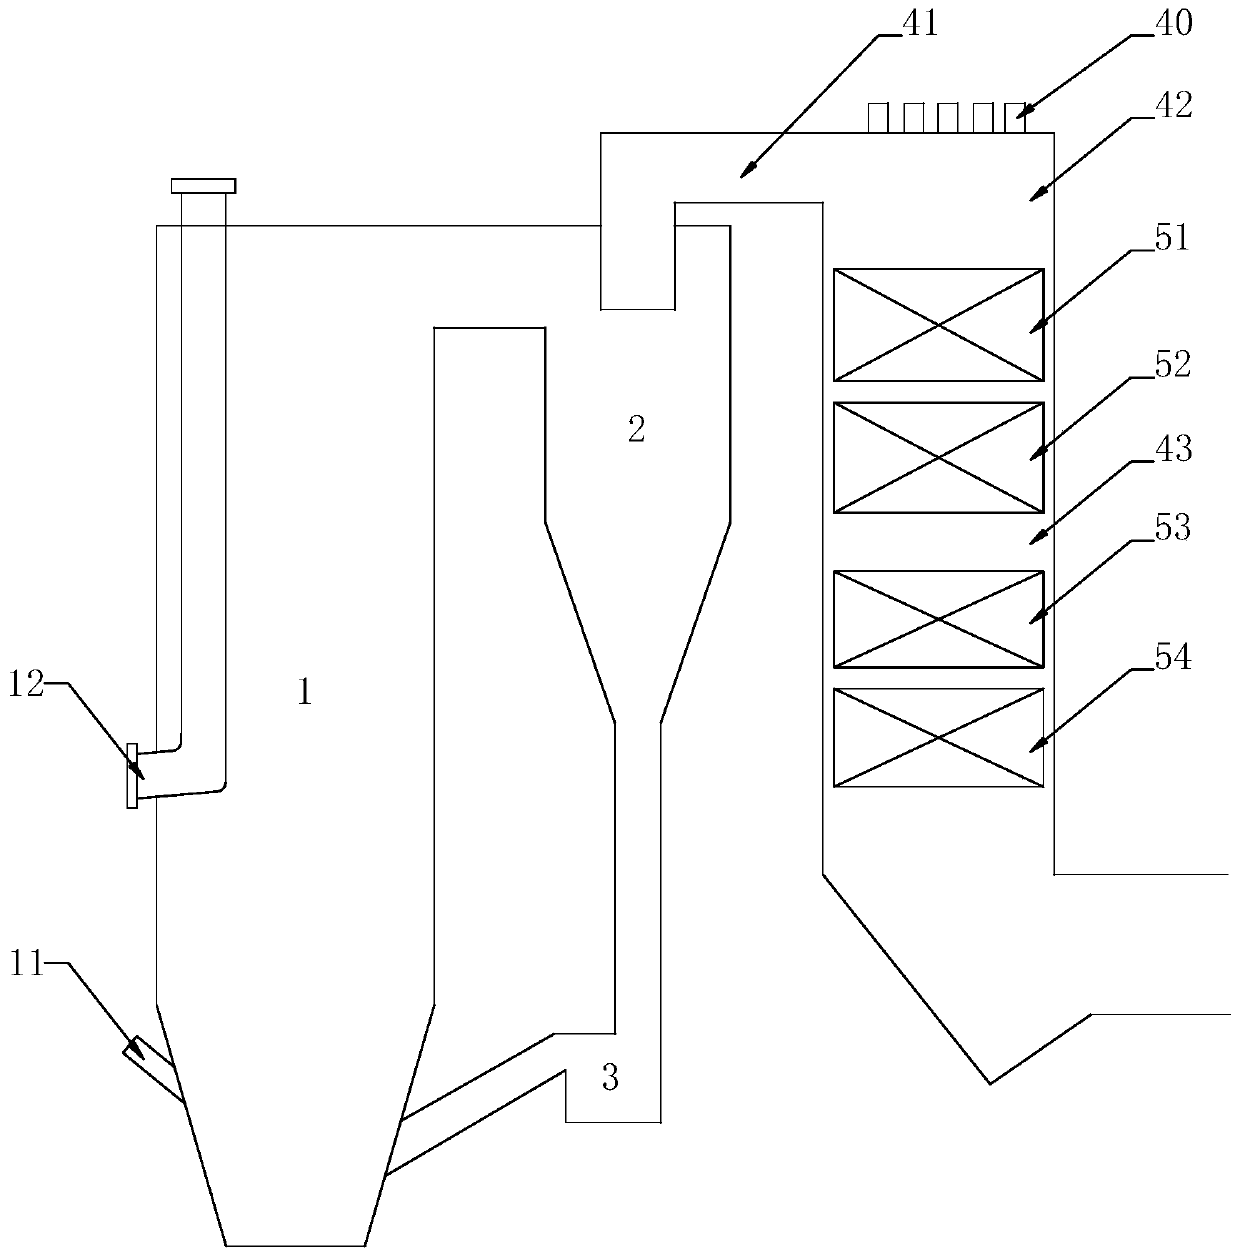 Circulating fluidized bed combustion method for adjusting superheated steam temperature